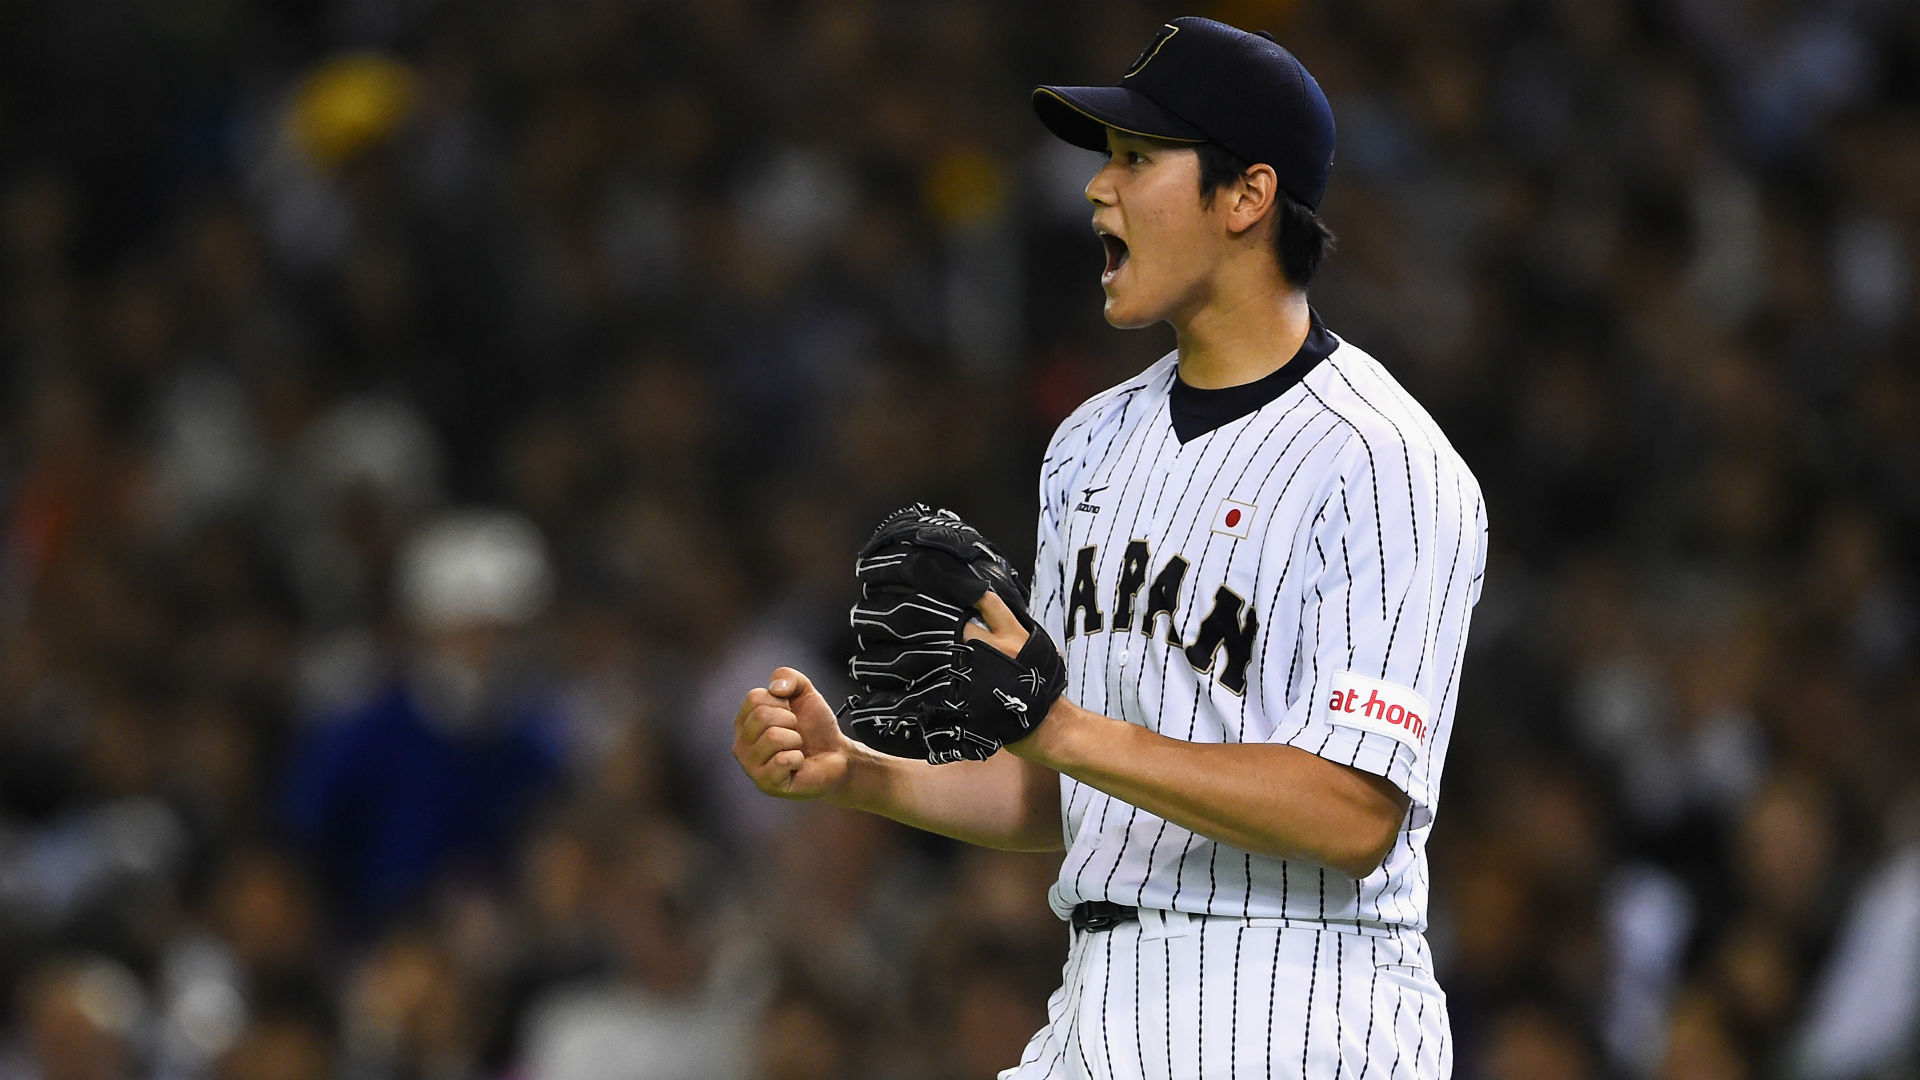 Ohtani bids farewell to Japan fans ahead of Los Angeles Angels